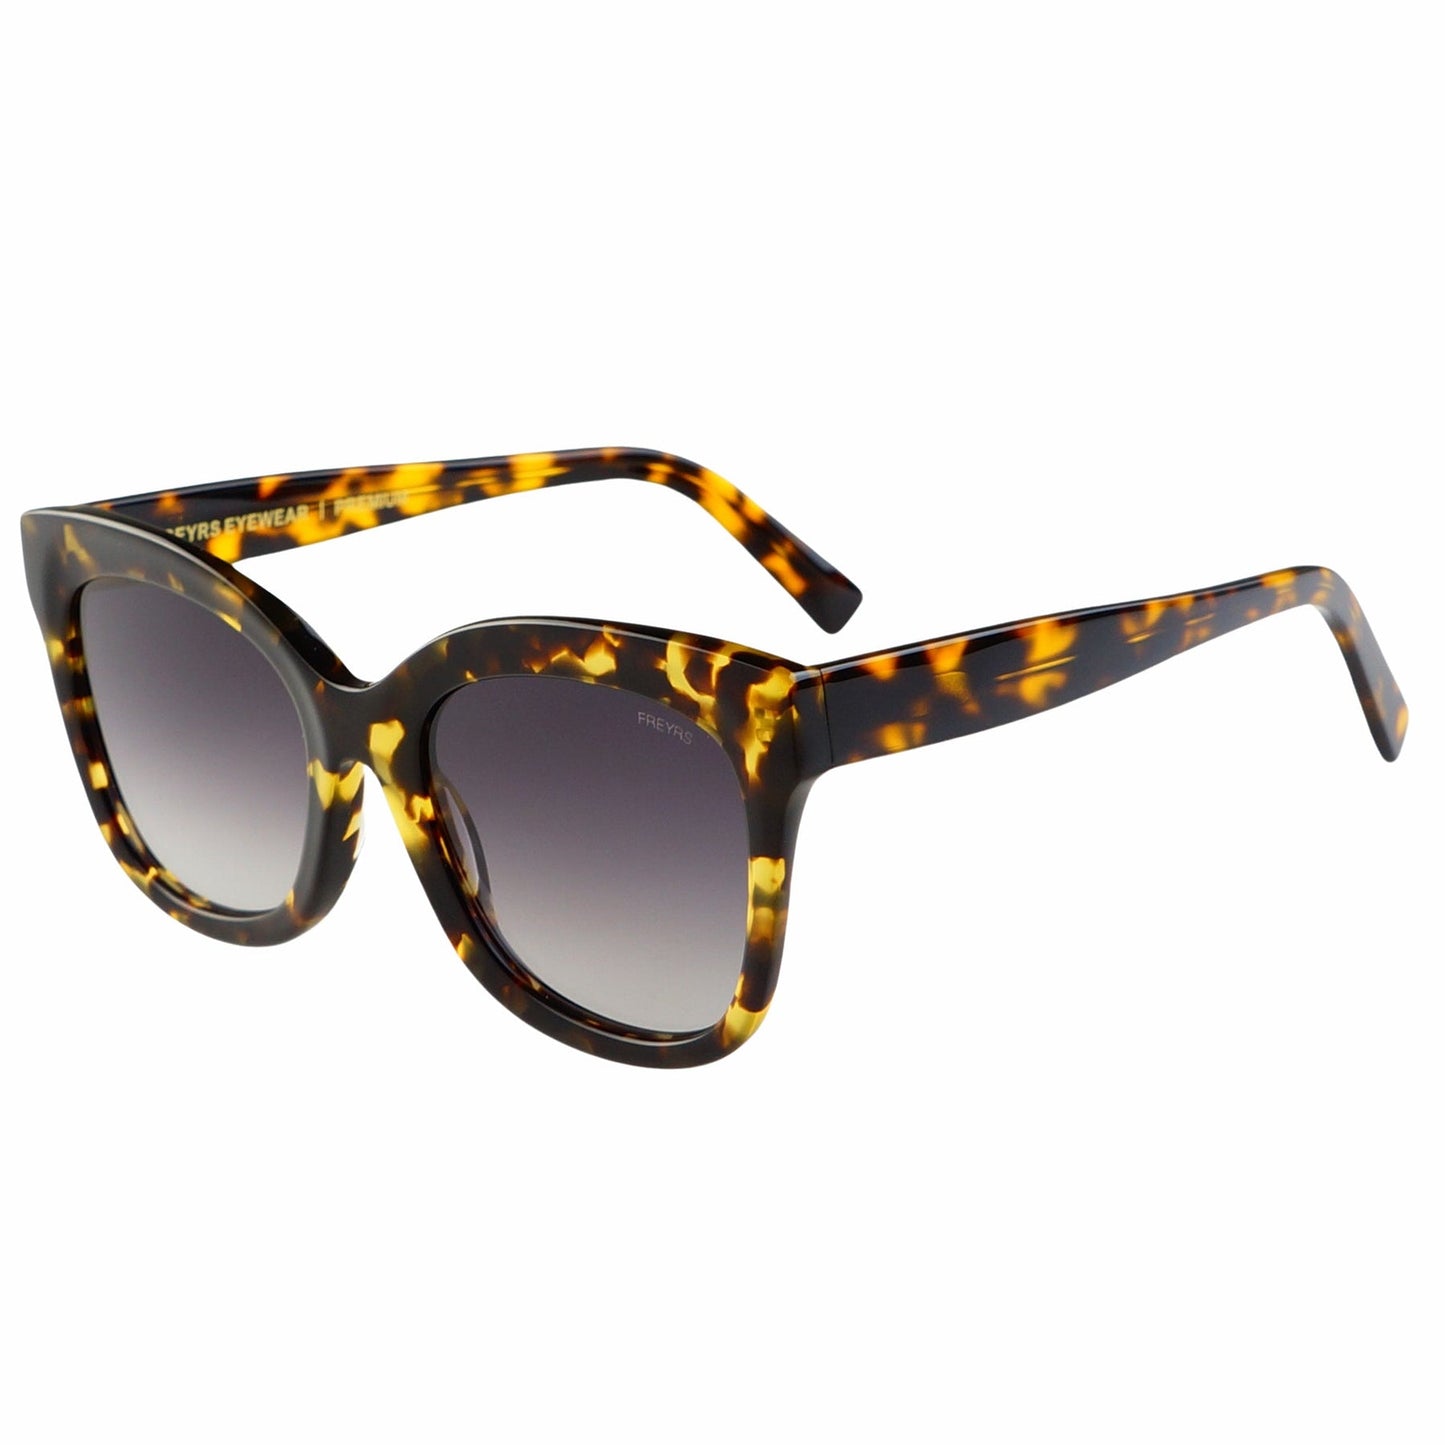 Load image into Gallery viewer, Stylish Naples Acetate Cat Eye Sunglasses
